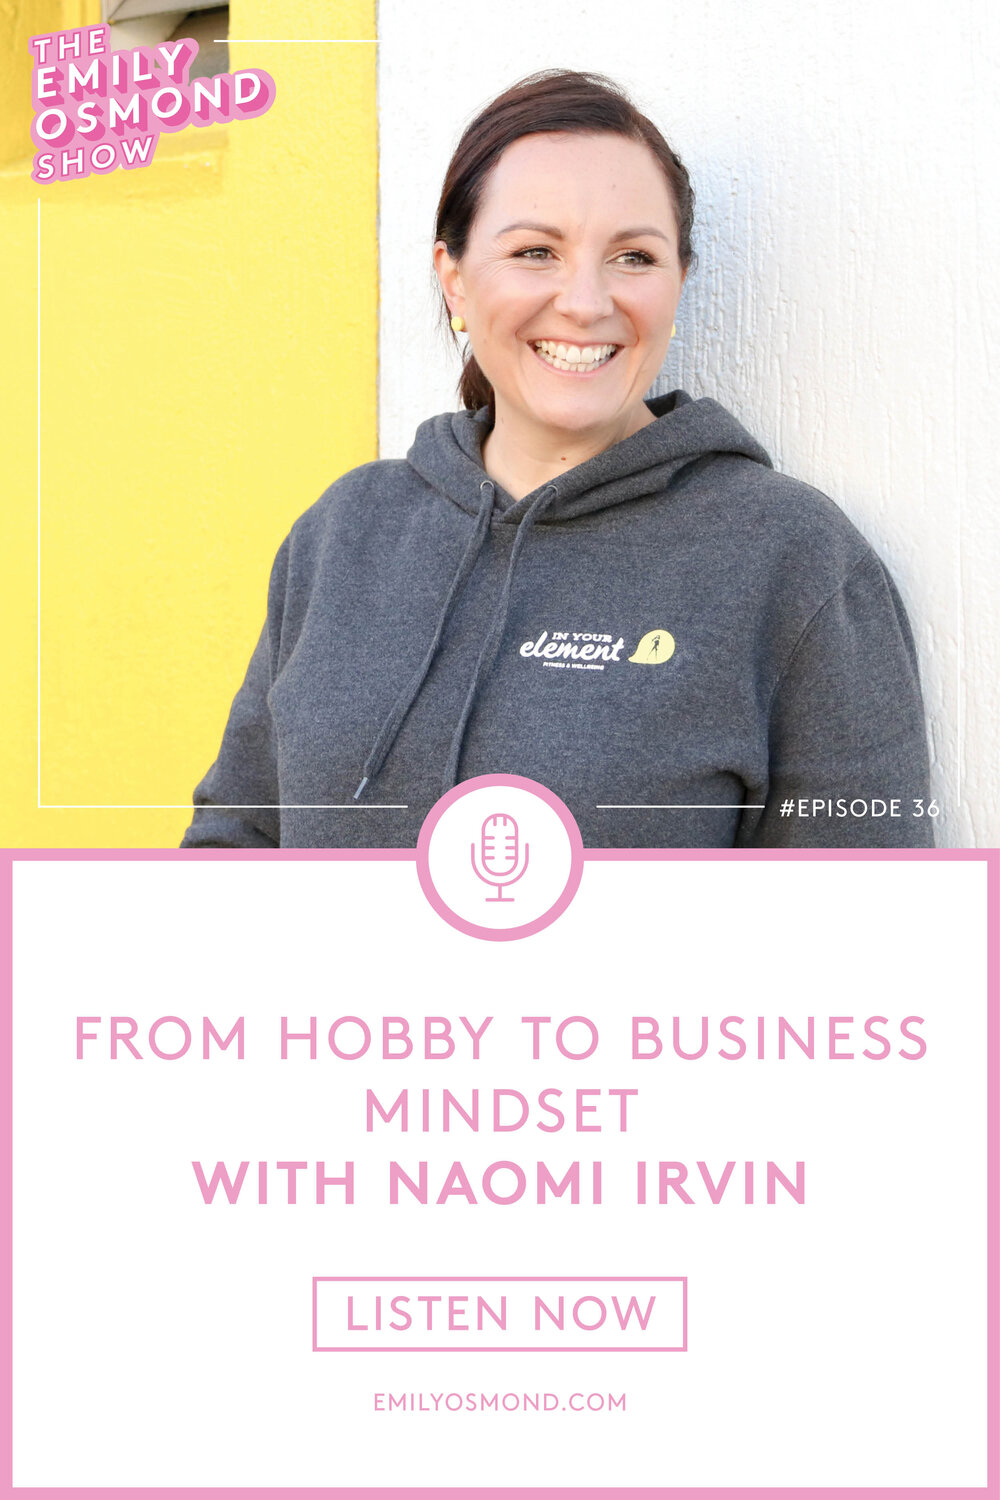 From hobby to business mindset with Naomi Irvin | Emily Osmond